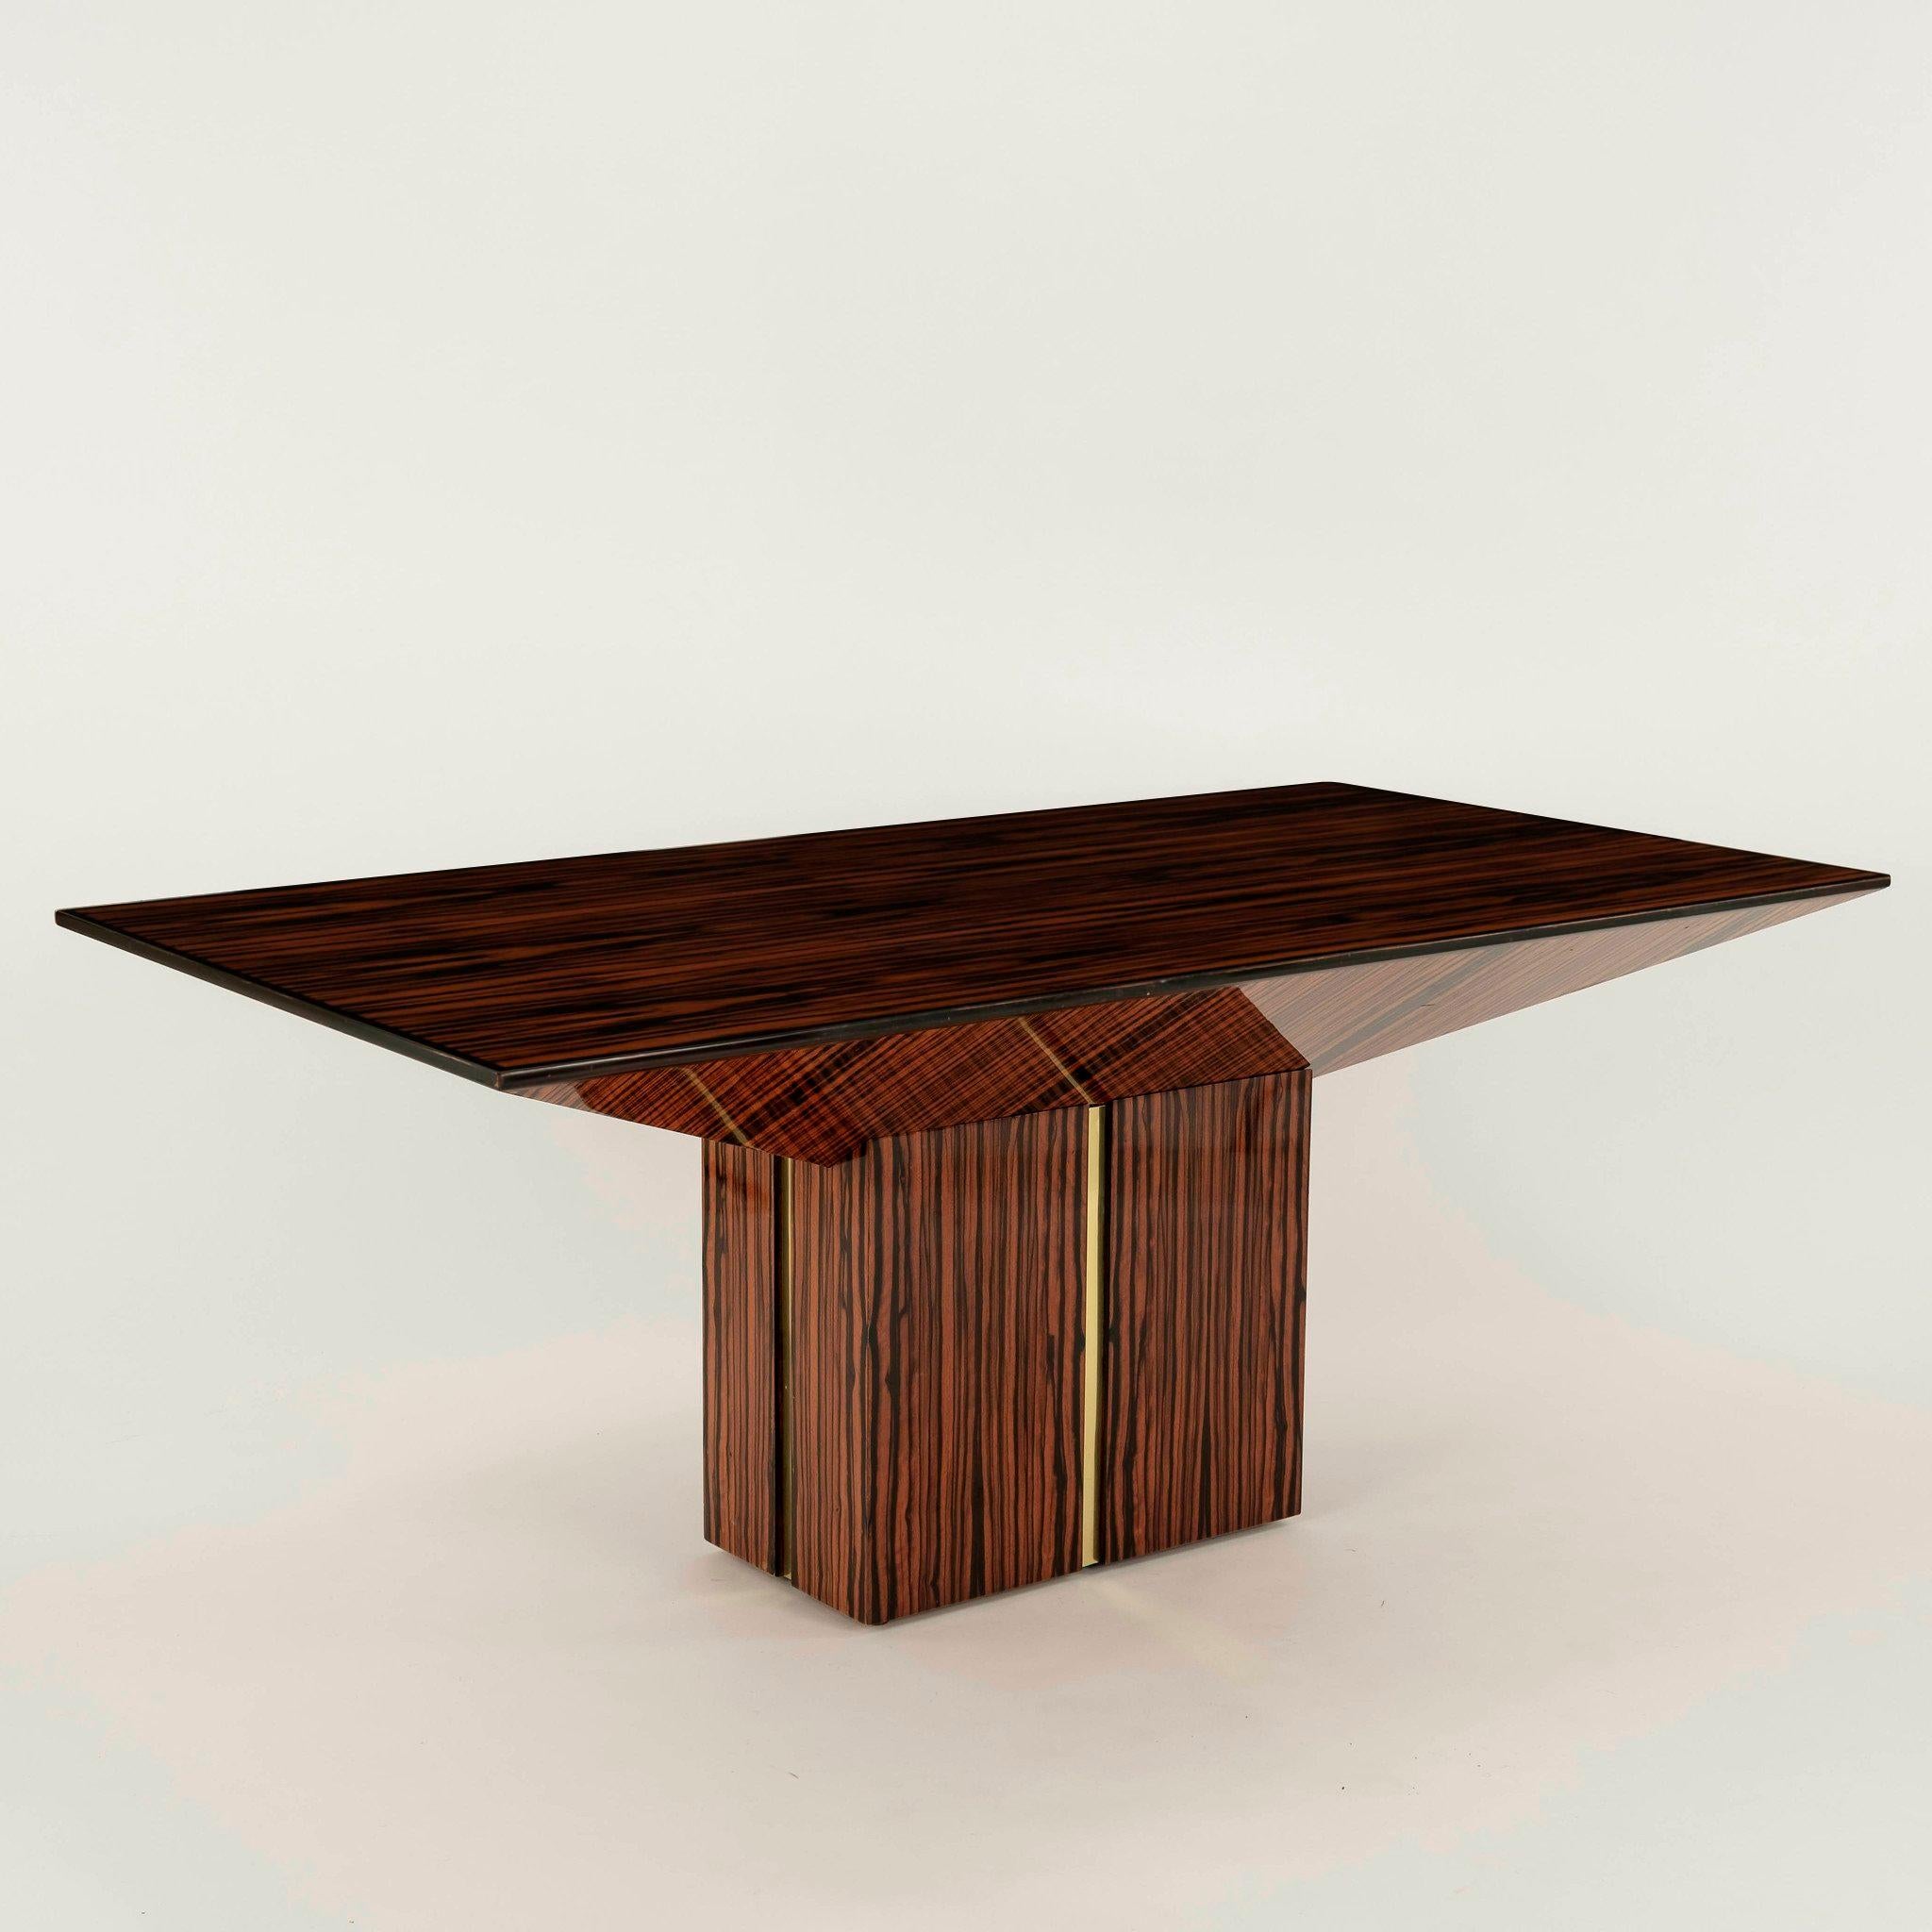 20th Century lacquered zebra wood and brass inlay table.